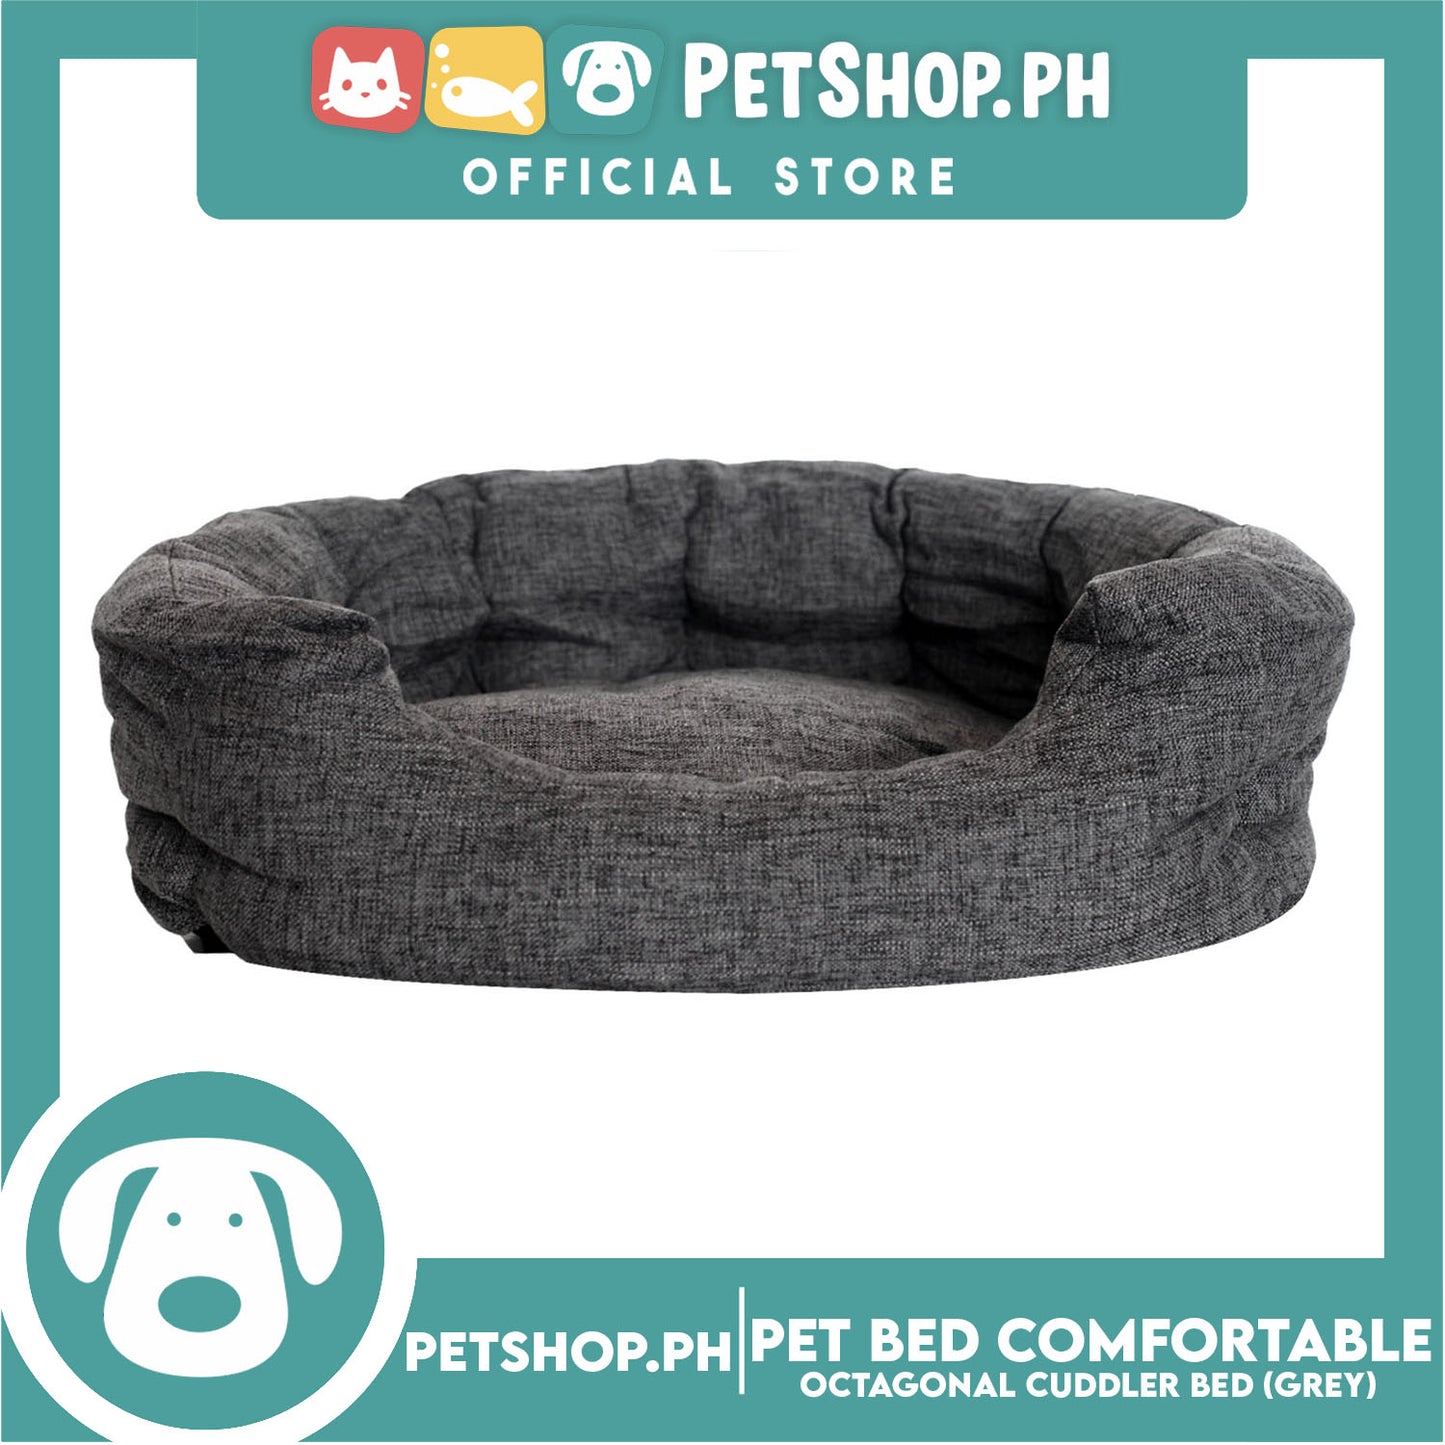 Pet Bed Comfortable Octagonal Cuddler Dog Bed 65x60x18cm Large for Dogs & Cats (Grey)